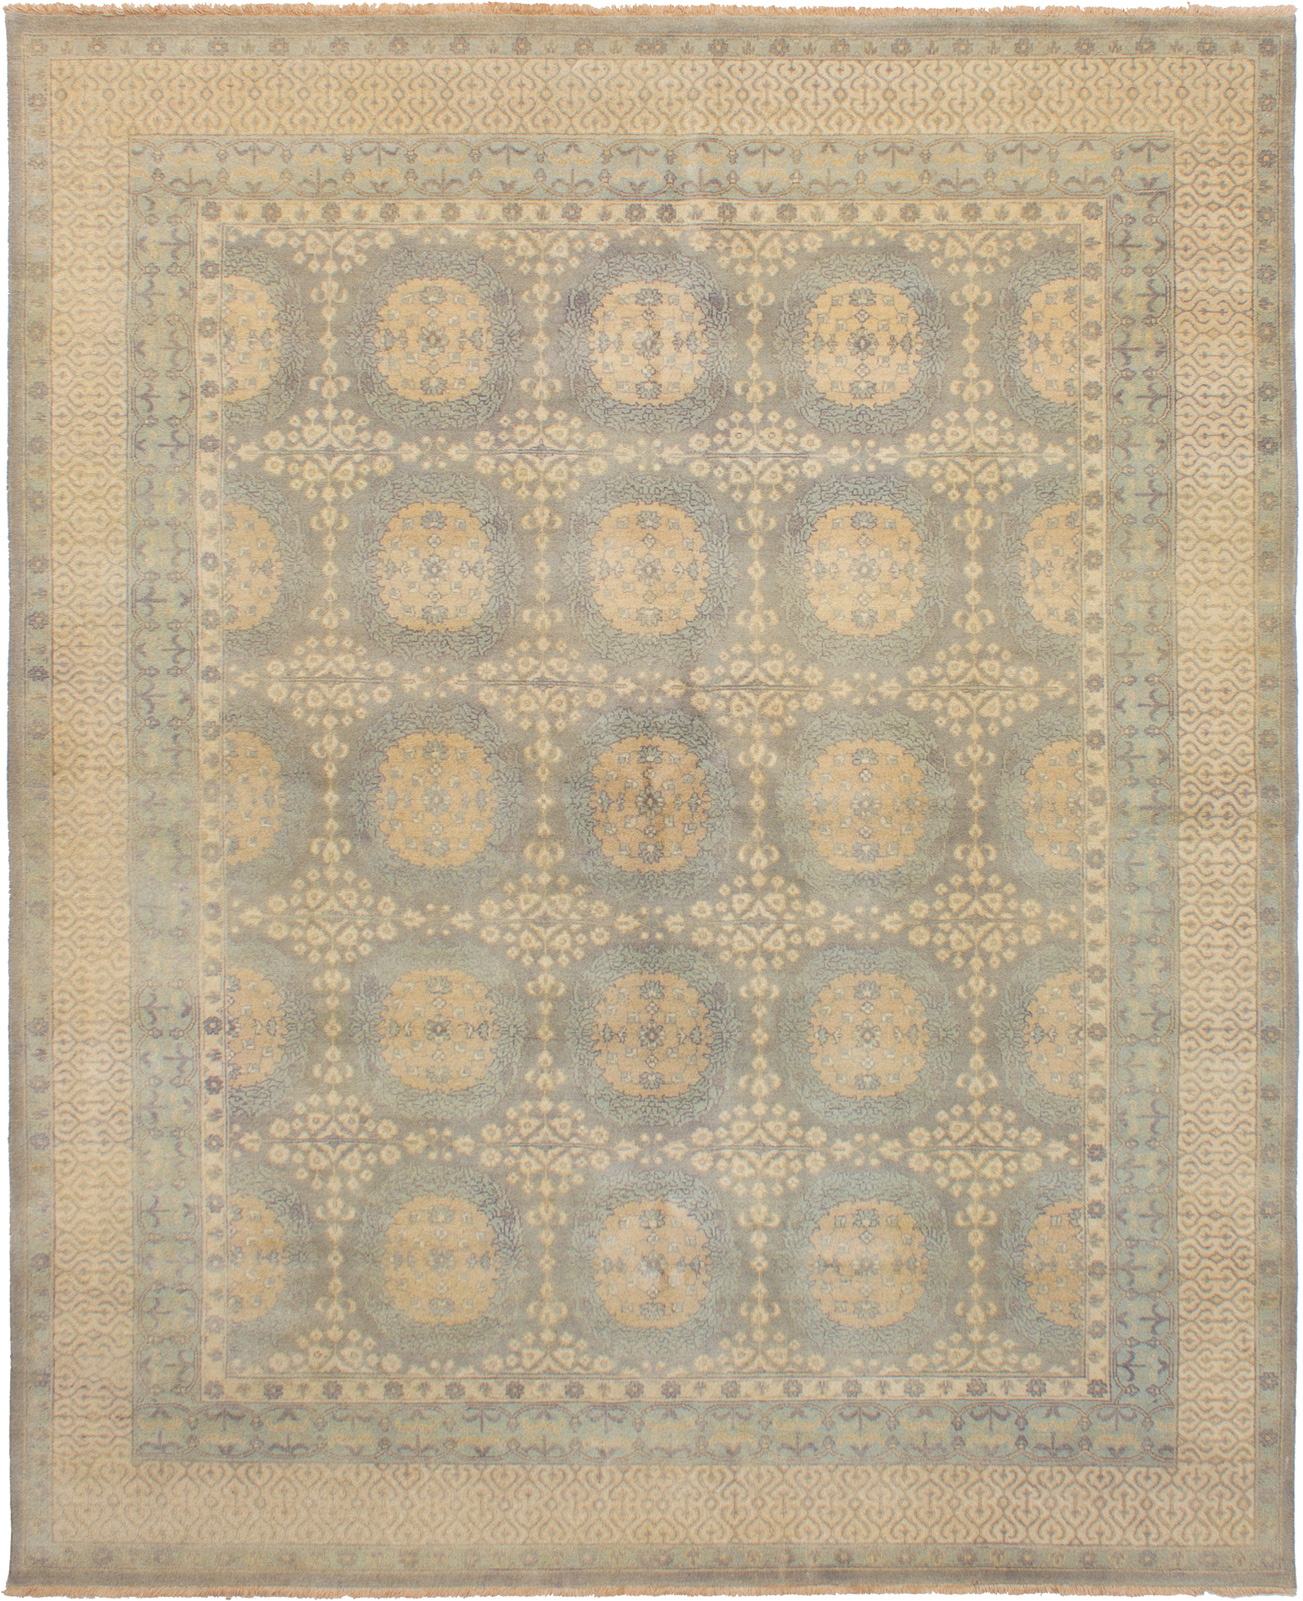 Hand-knotted Elysee Finest Ushak Grey Wool Rug 8'1" x 9'11" Size: 8'1" x 9'11"  